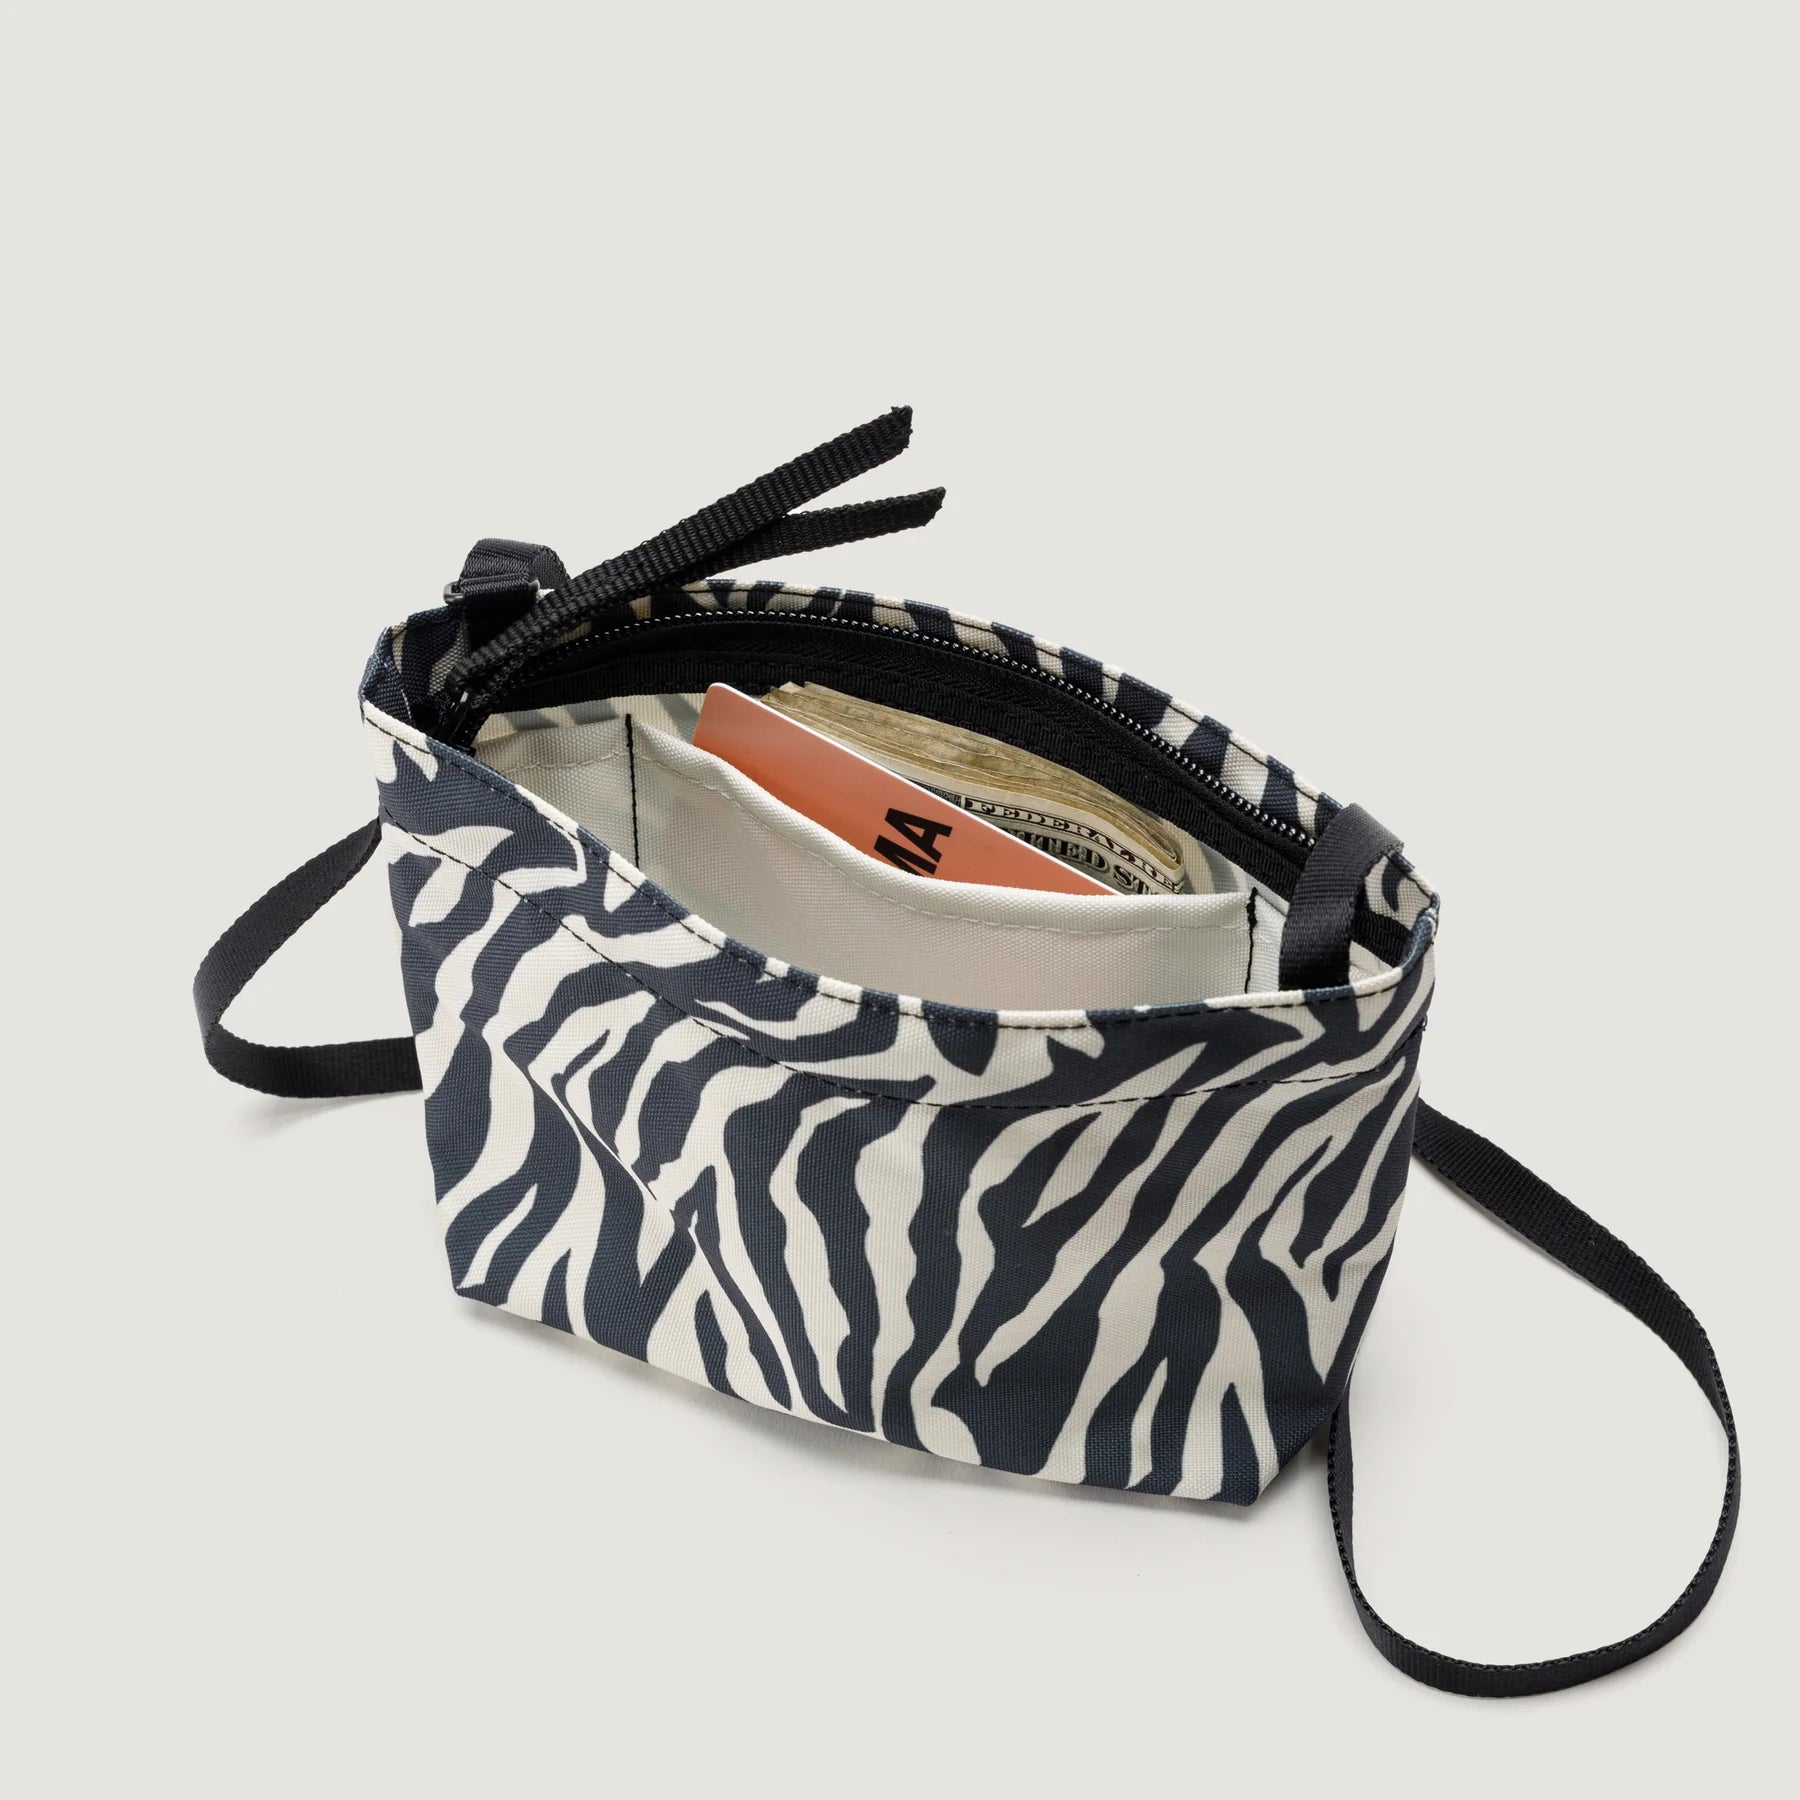 Open Zipper Pouch Mini, Zebra from Bags in Progress with cash and credit cards inside, showing a zippered compartment on a white background.